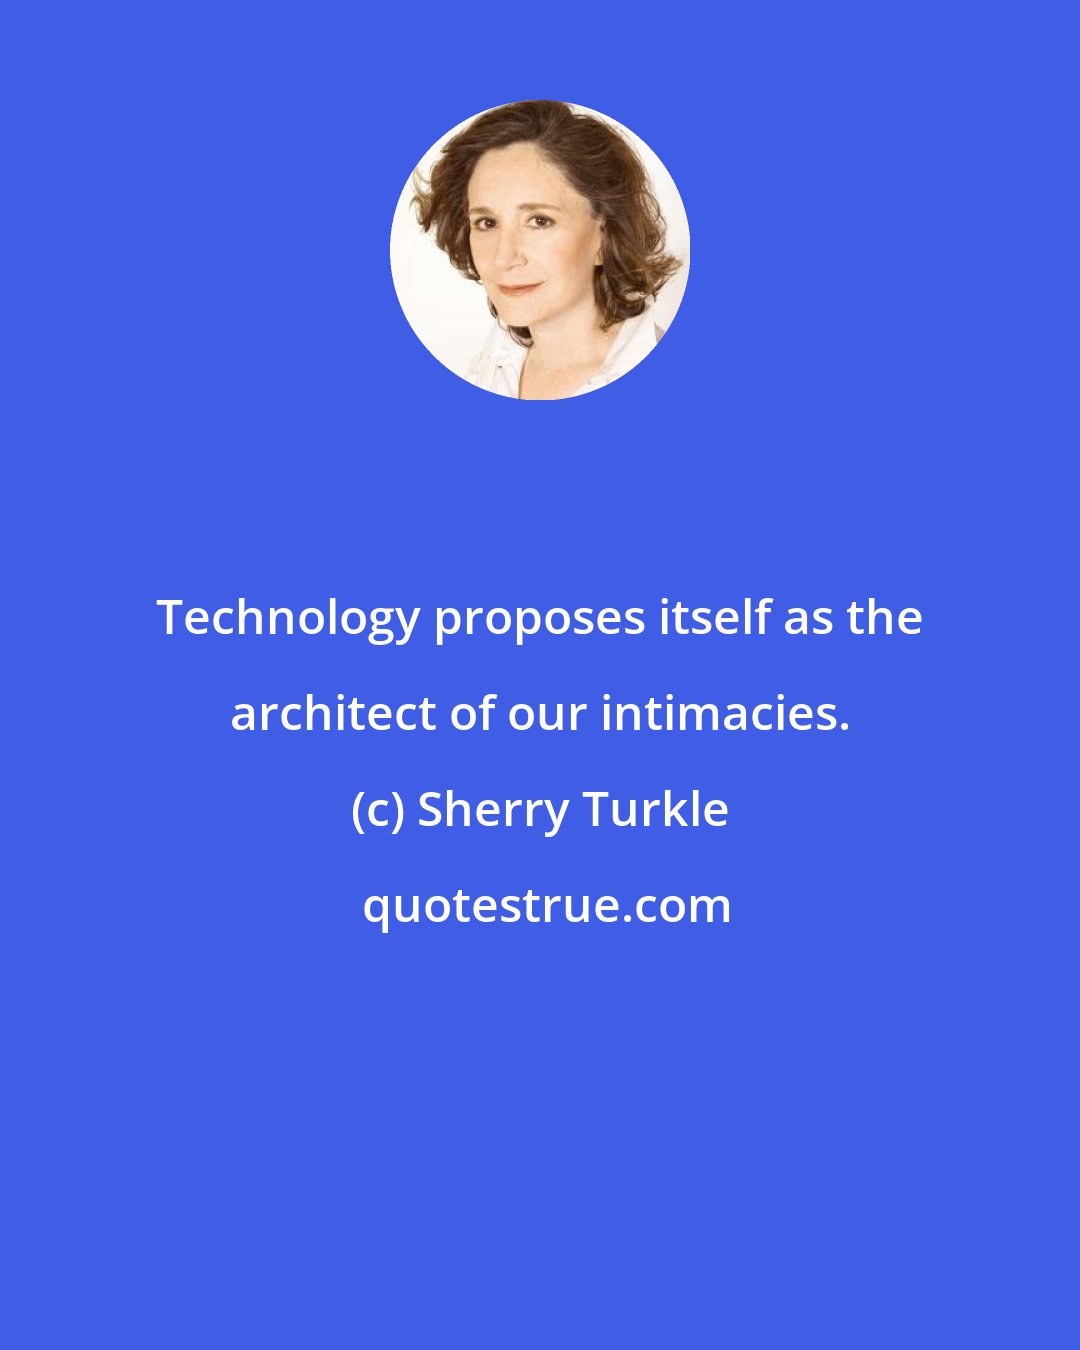 Sherry Turkle: Technology proposes itself as the architect of our intimacies.